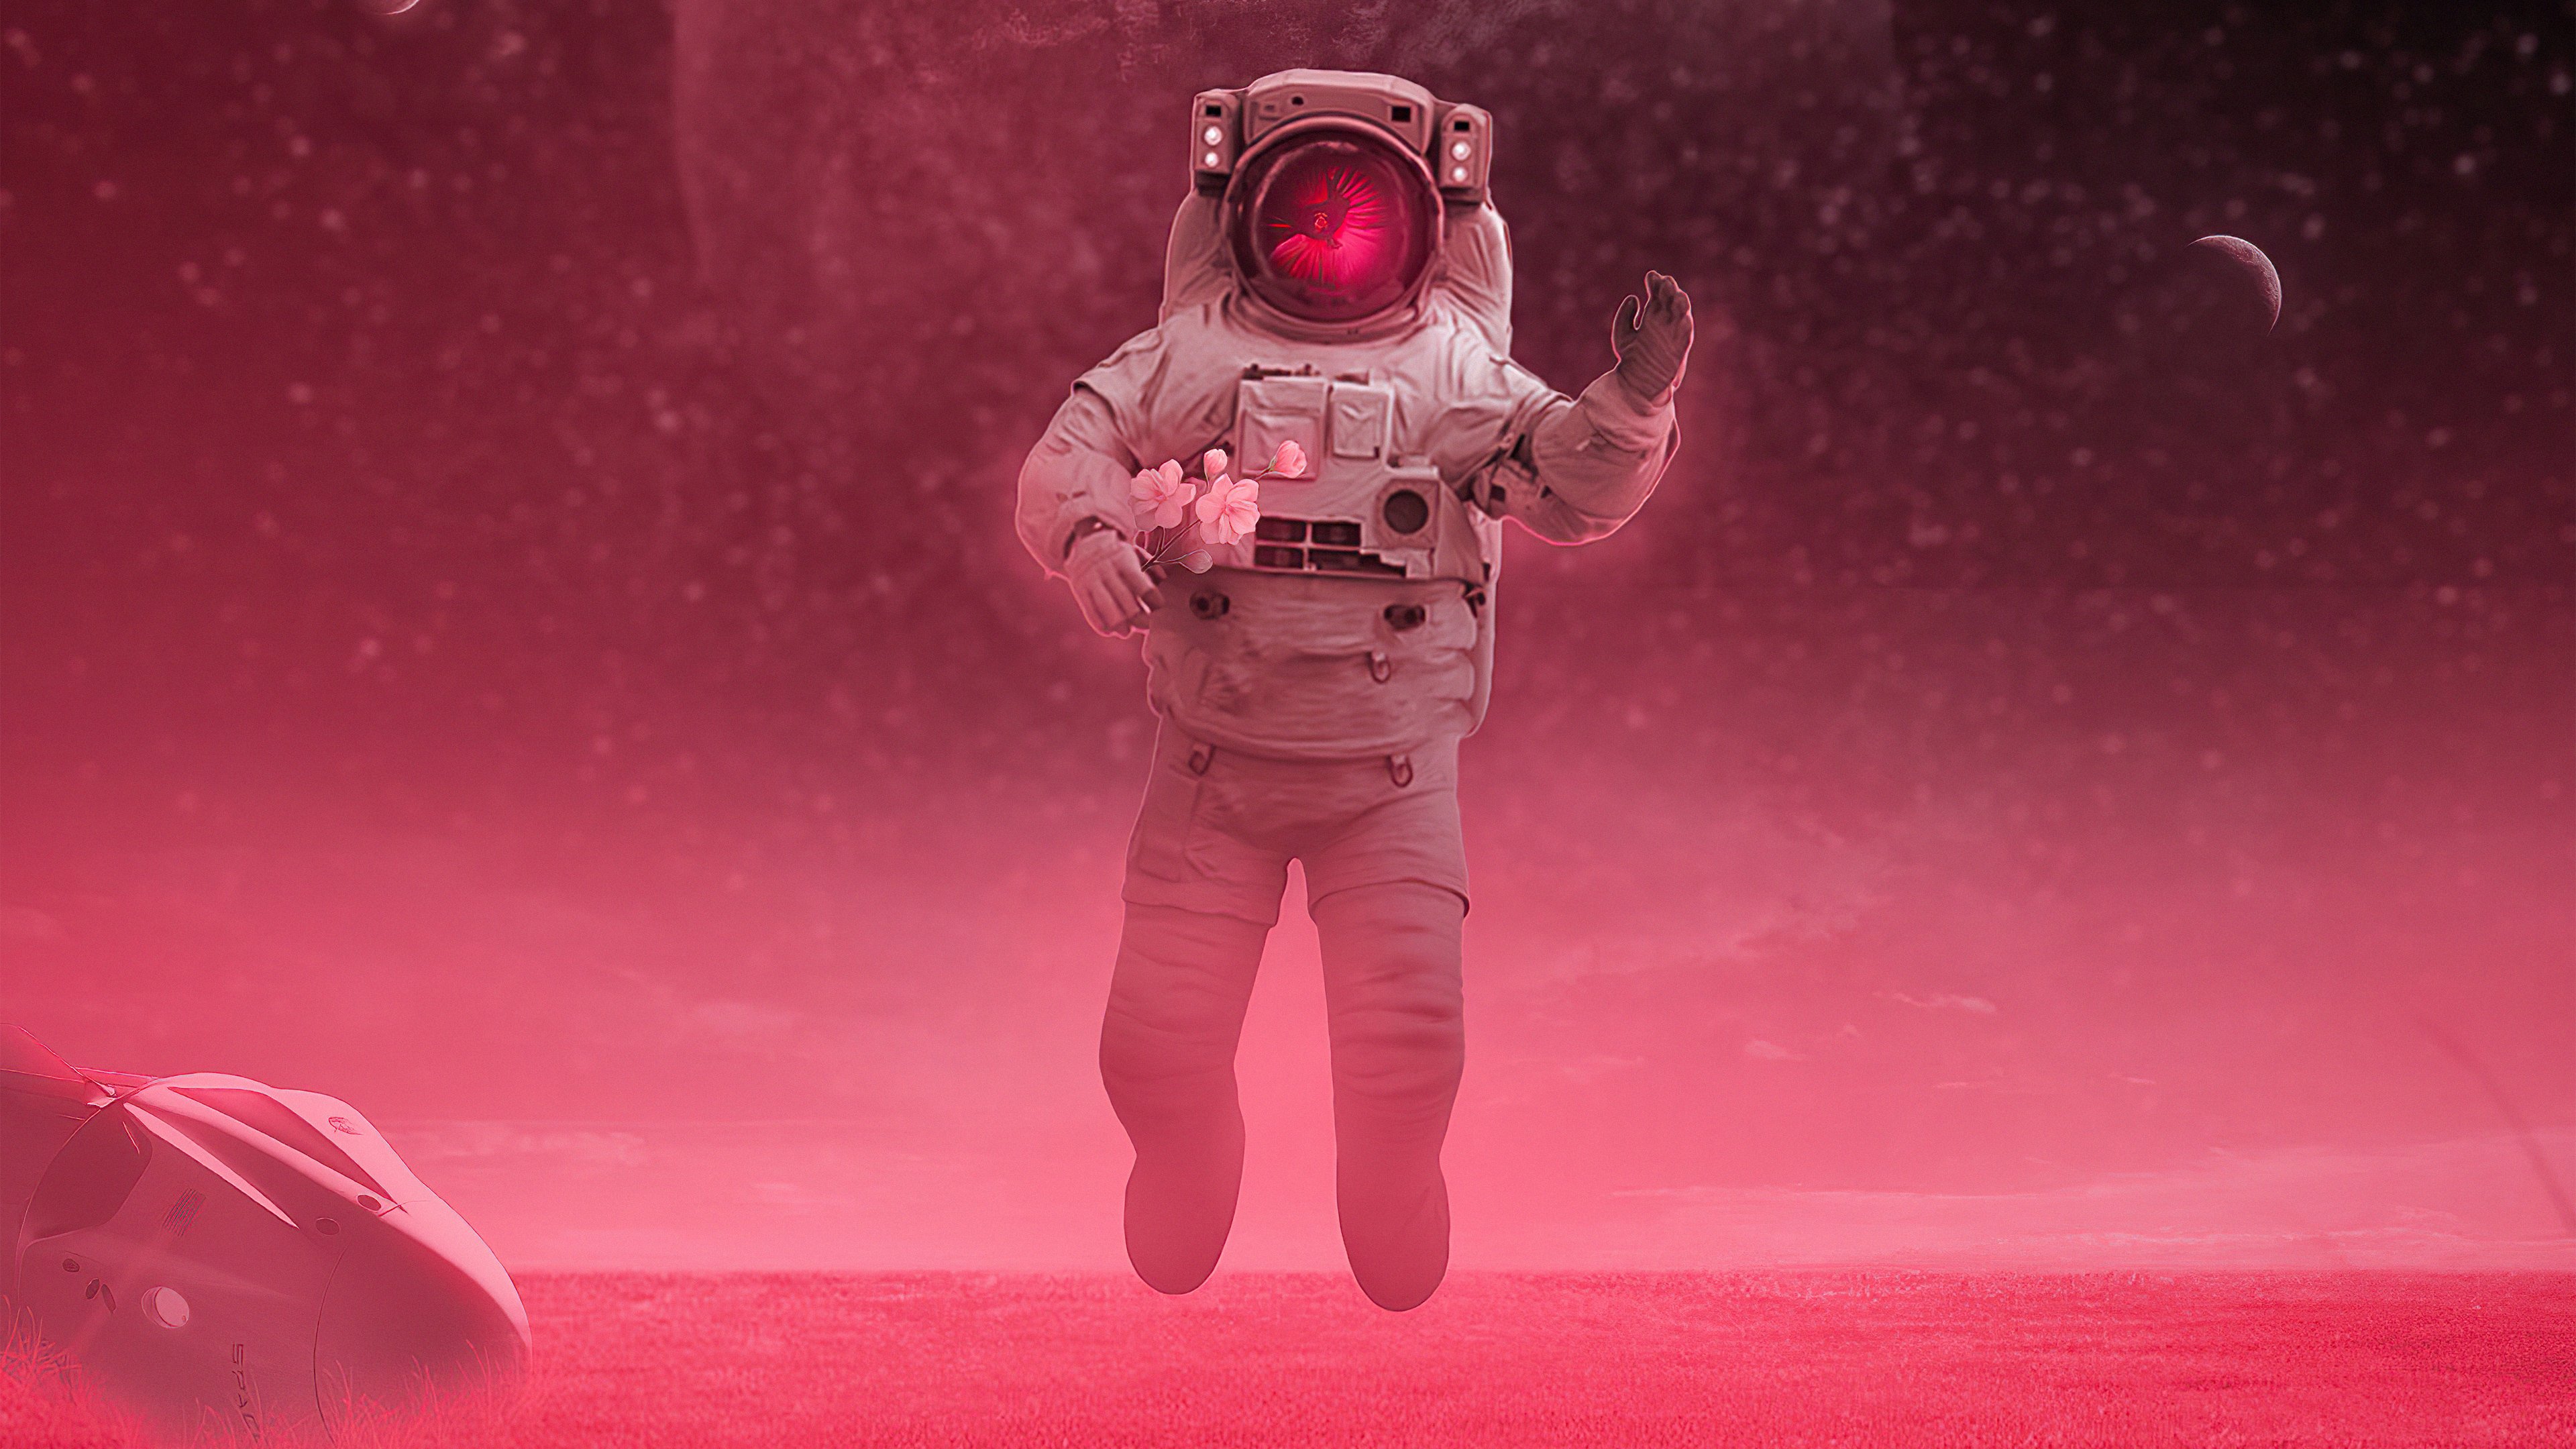 Wallpaper Astronaut floating in space